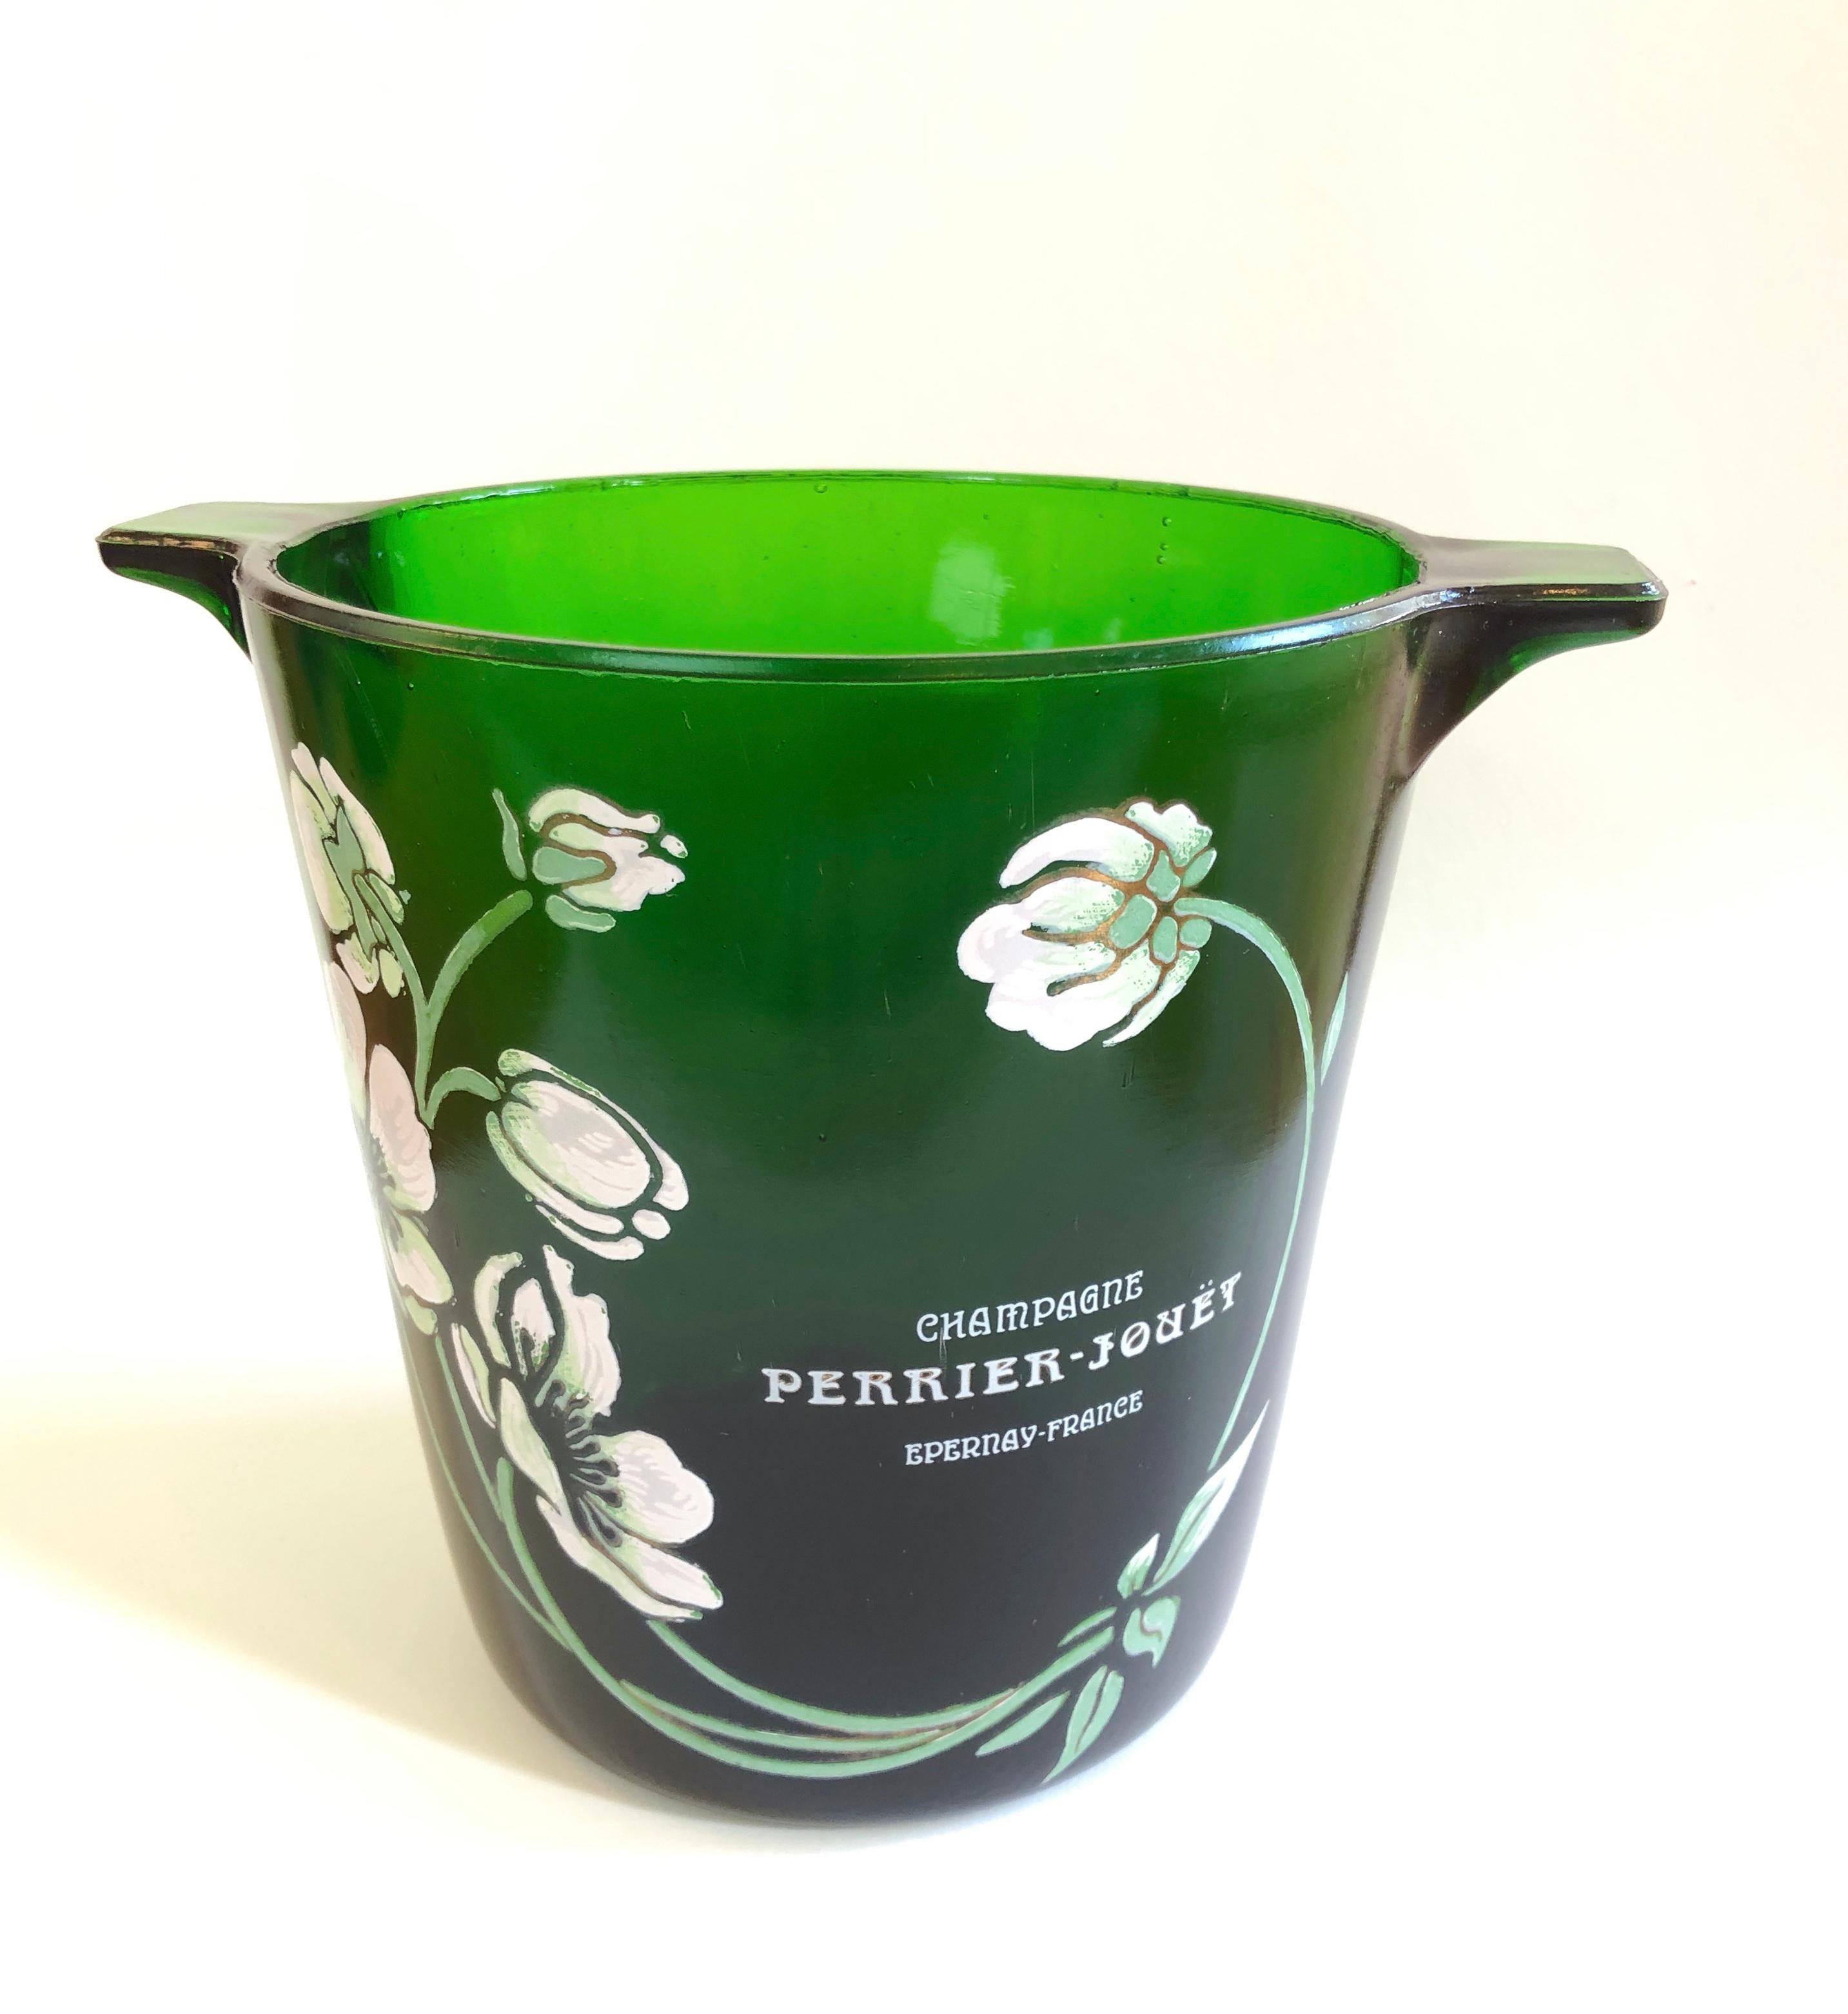 A very beautiful vintage Perrier-Jouet French Champagne bucket with iconic floral motif in the Art Nouveau style. Piece is substantial emerald green glass with raised enamel relief in mint & mild white to pink floral design.

A state-of-the-art